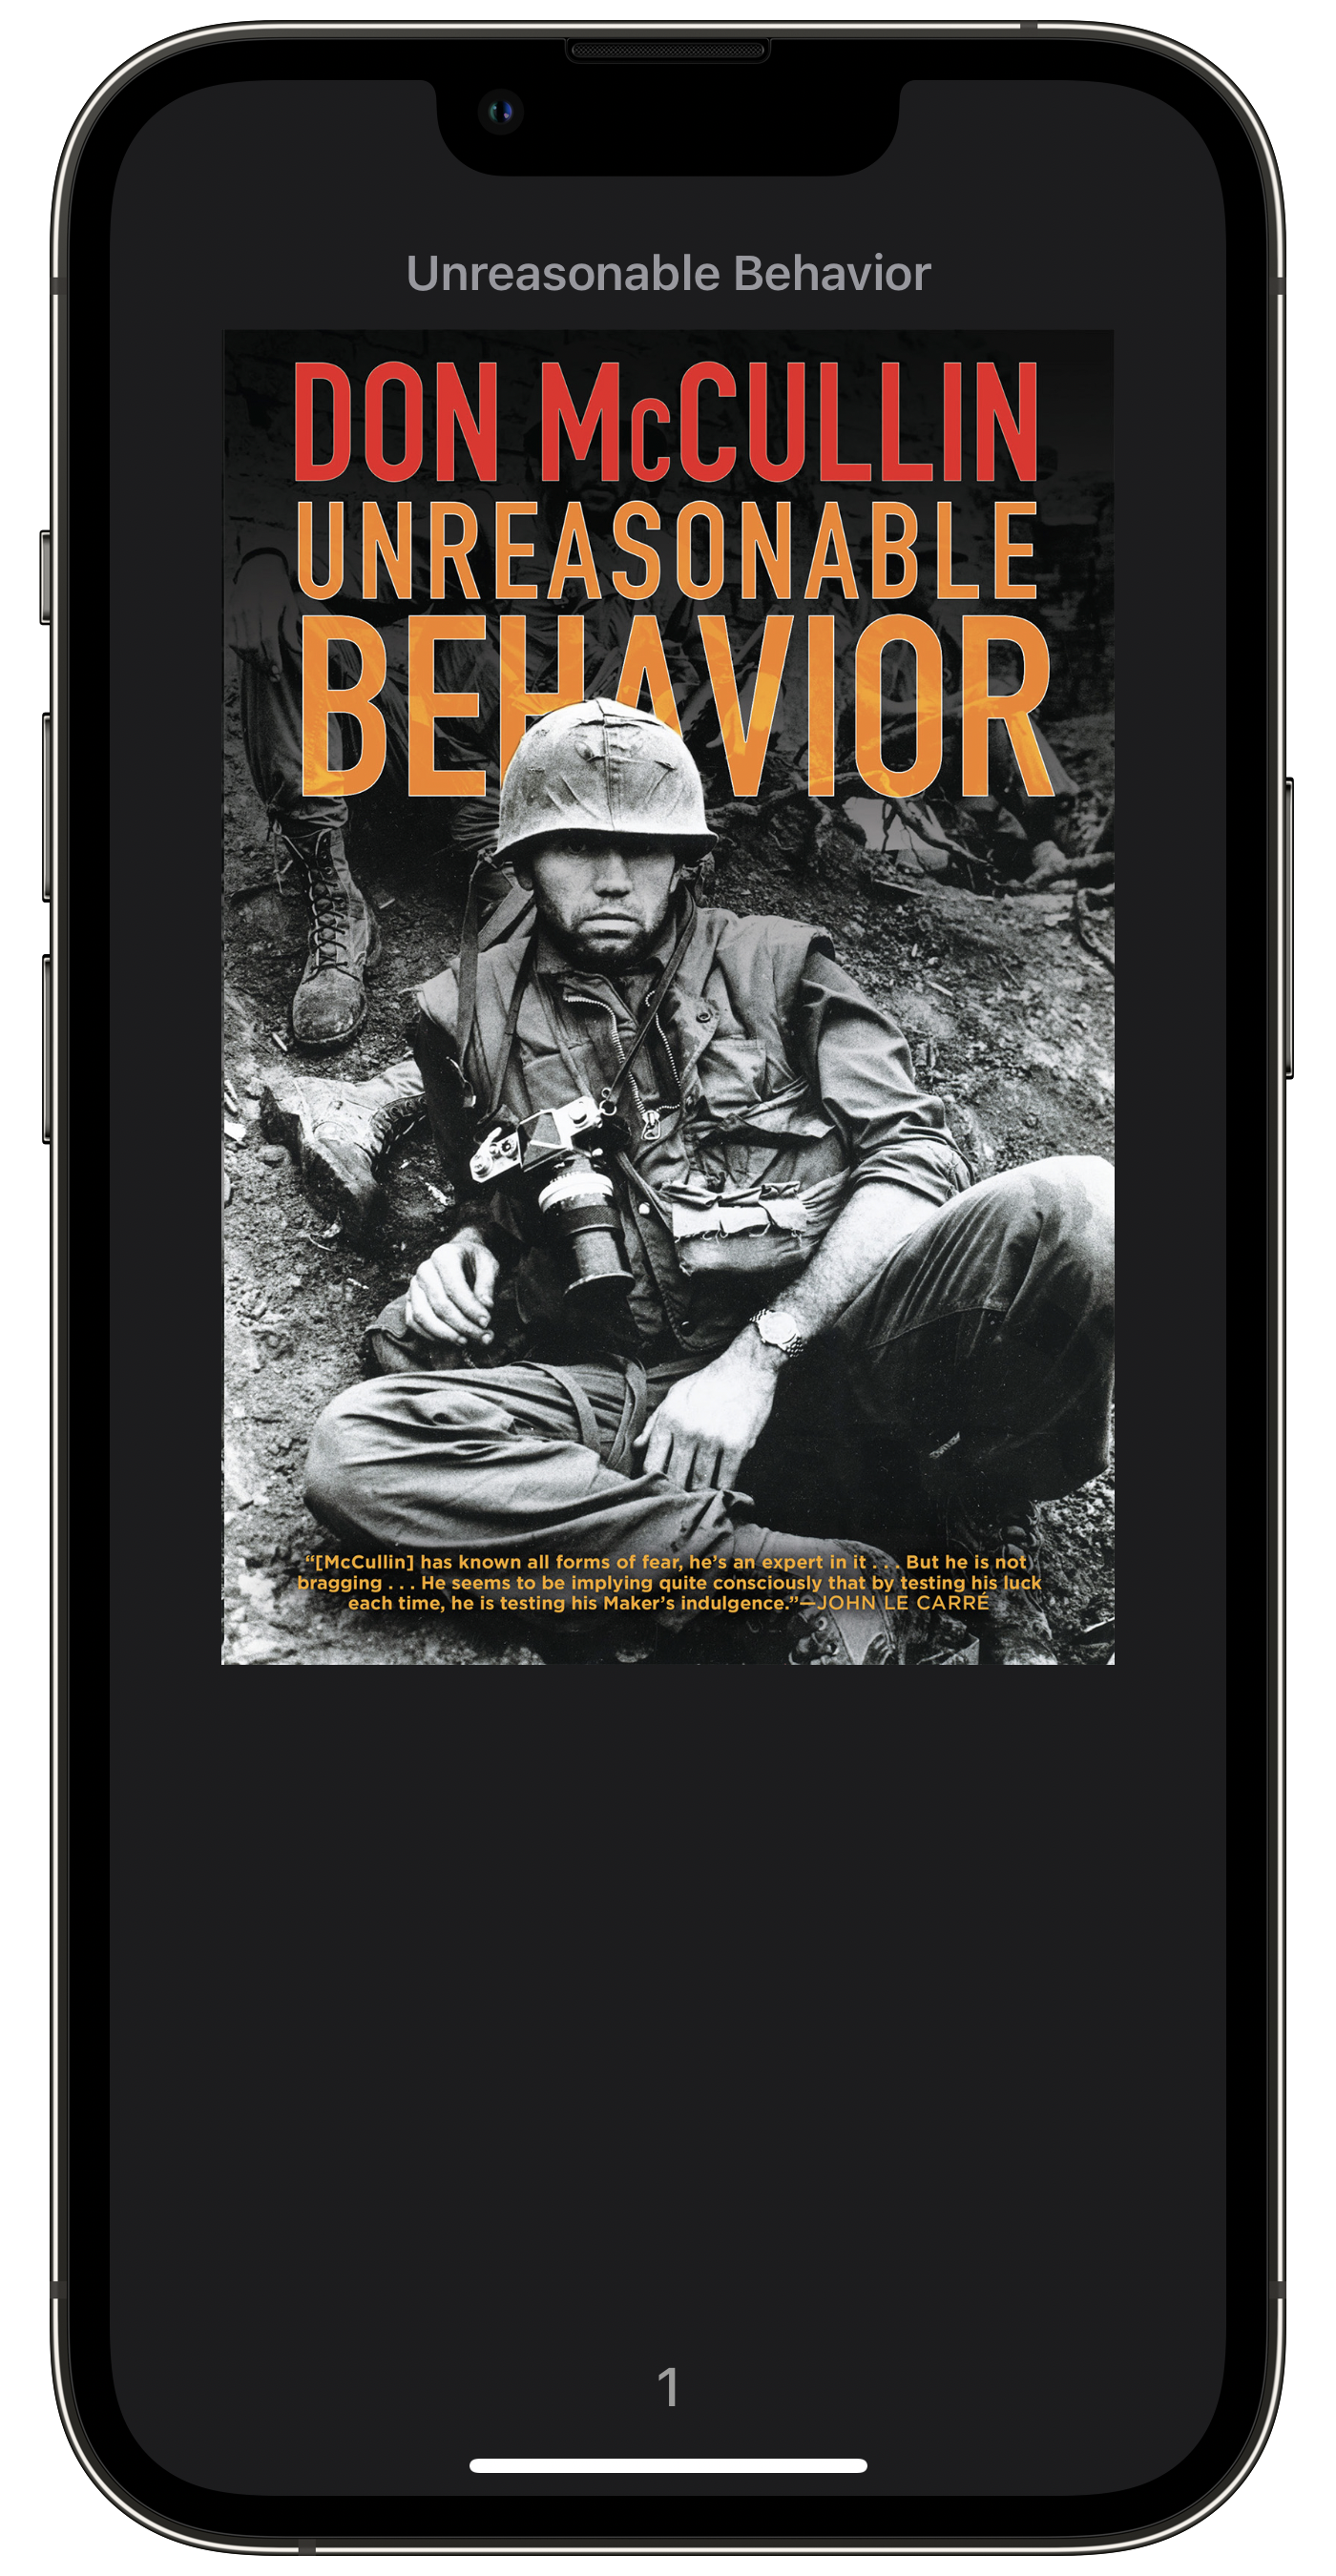 Mock-up of an iPhone, with Book.app open and a copy of Don McCullin’s autobiography “Unreasonable Behavior“. 